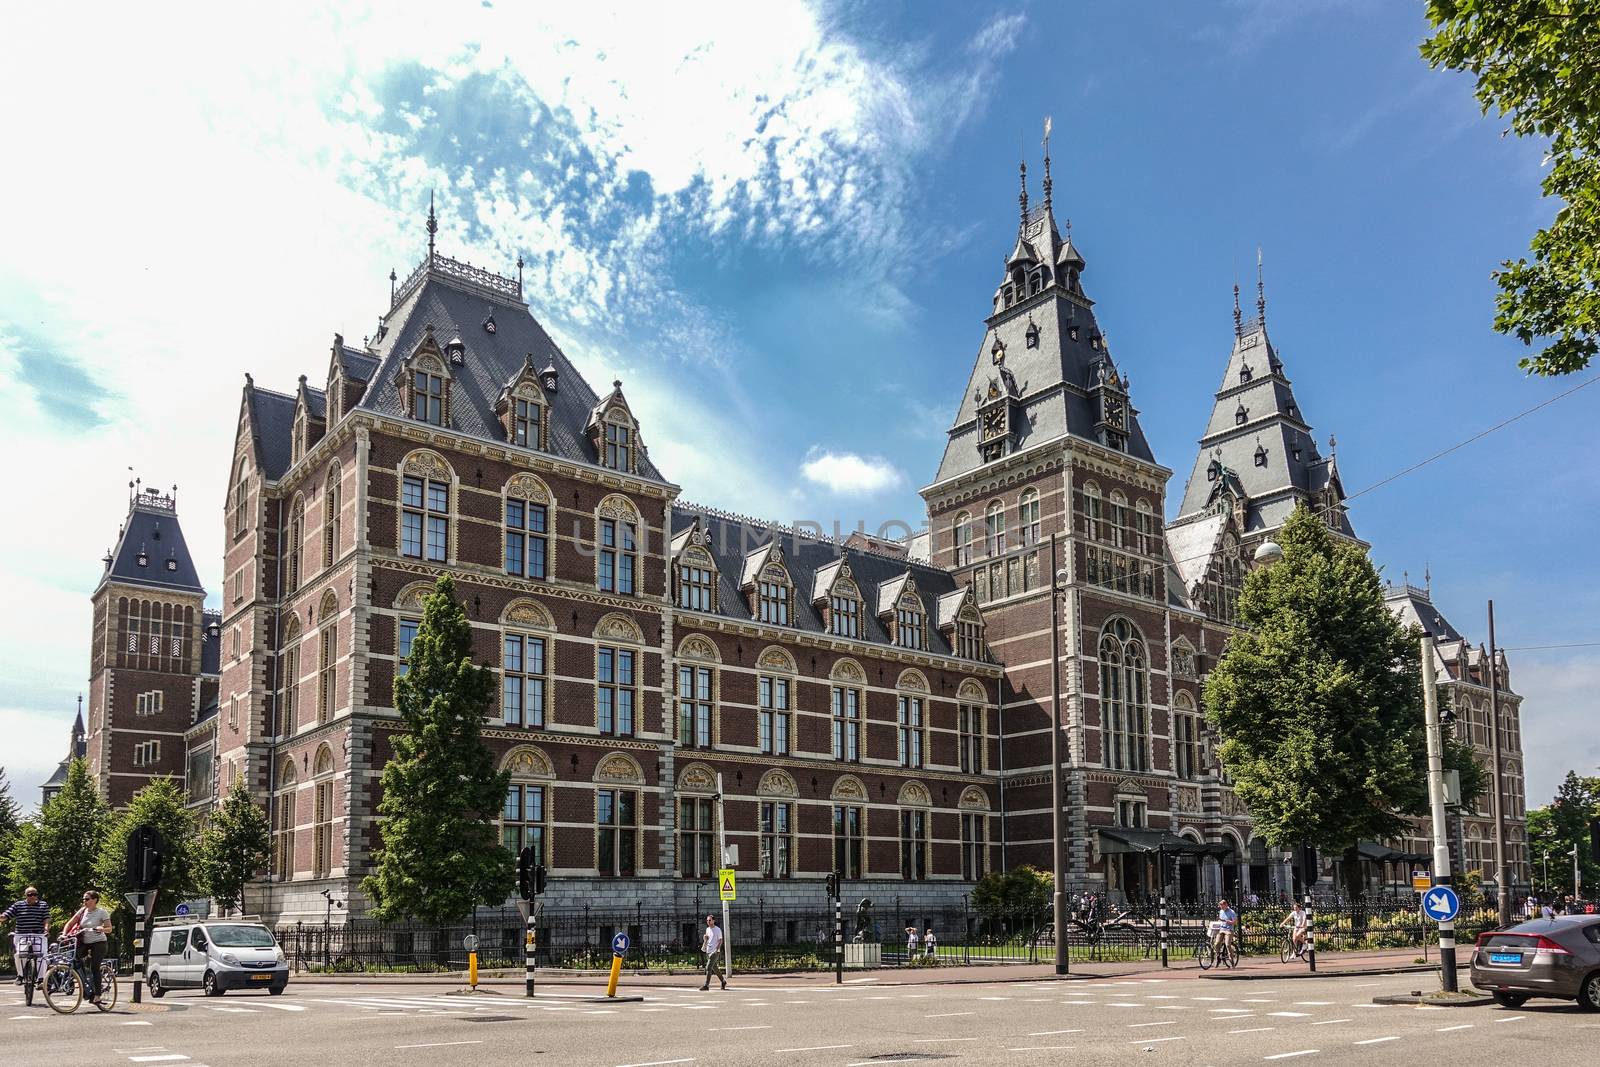 Amsterdam, the Netherlands - June 30, 2019: Wide shot of Rijksmuseum Monumental facade with towers in beige and red bricks. Under blue-whtie cloudscape. People in front.